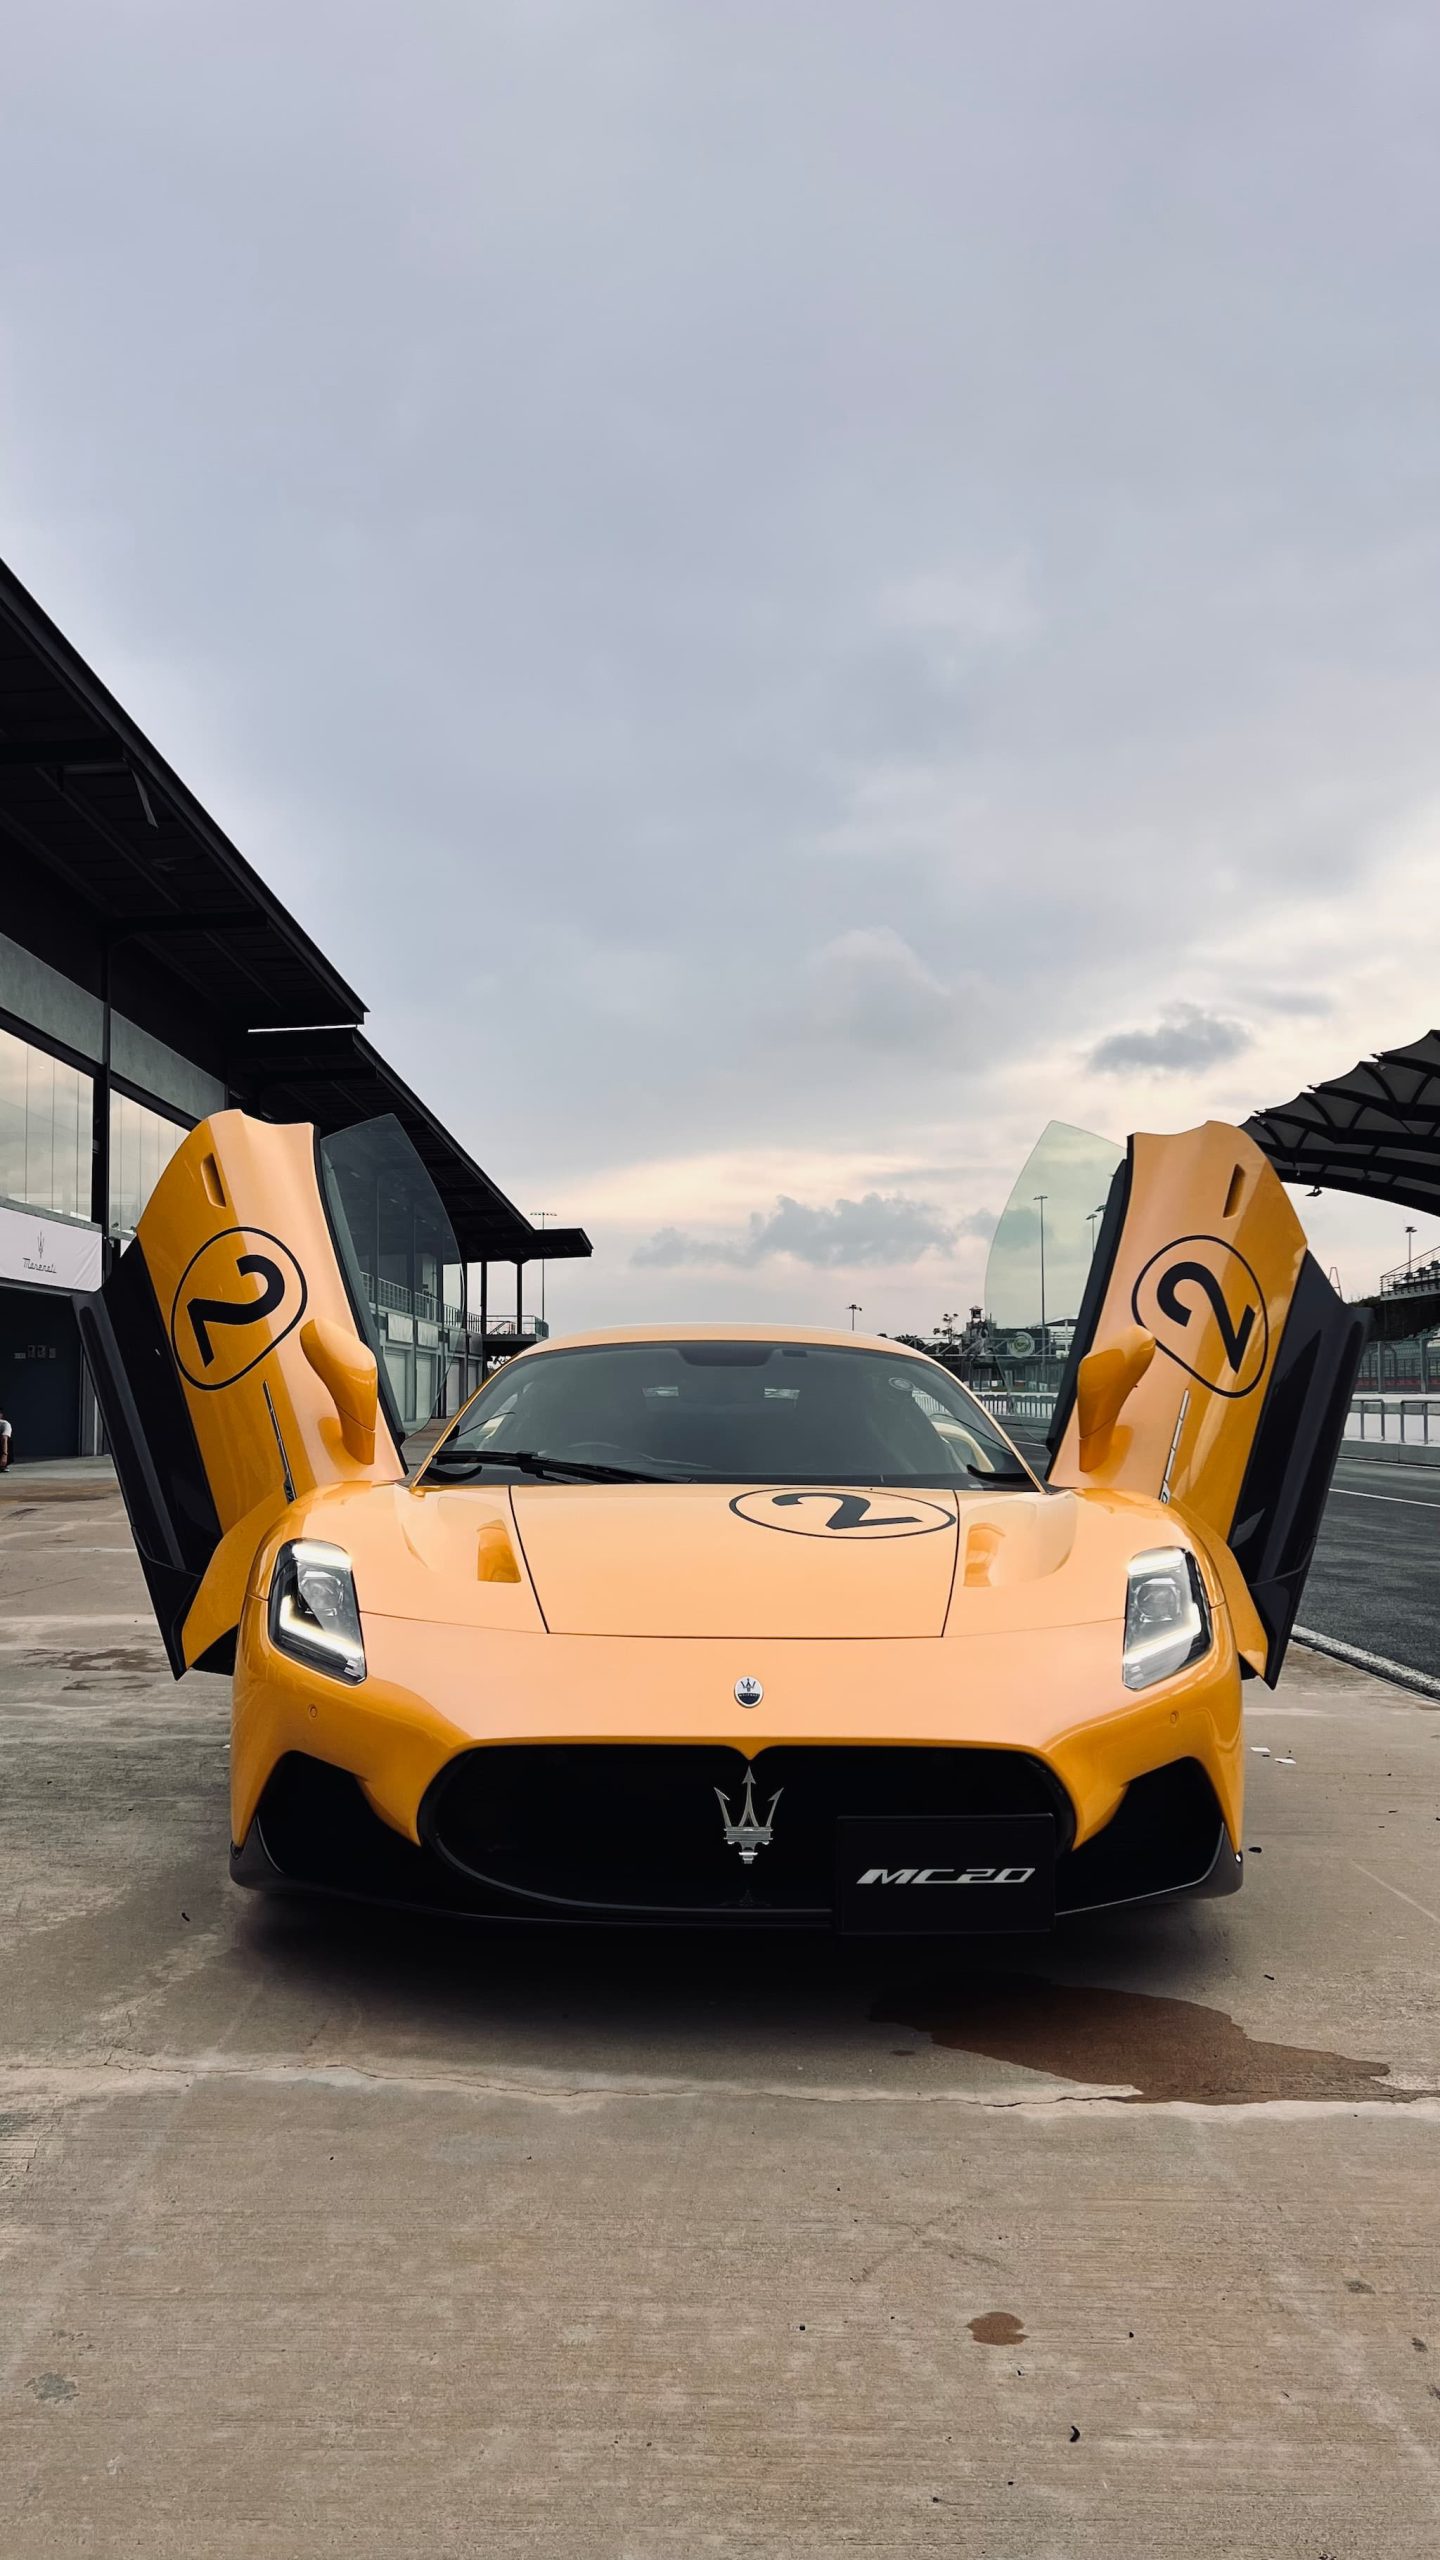 With its butterfly doors up, and an eye-popping shade of yellow reflecting off Sepang’s freshly rained-upon tarmac, the MC20 is a vision (Image Source: Parth Charan/Moneycontrol)